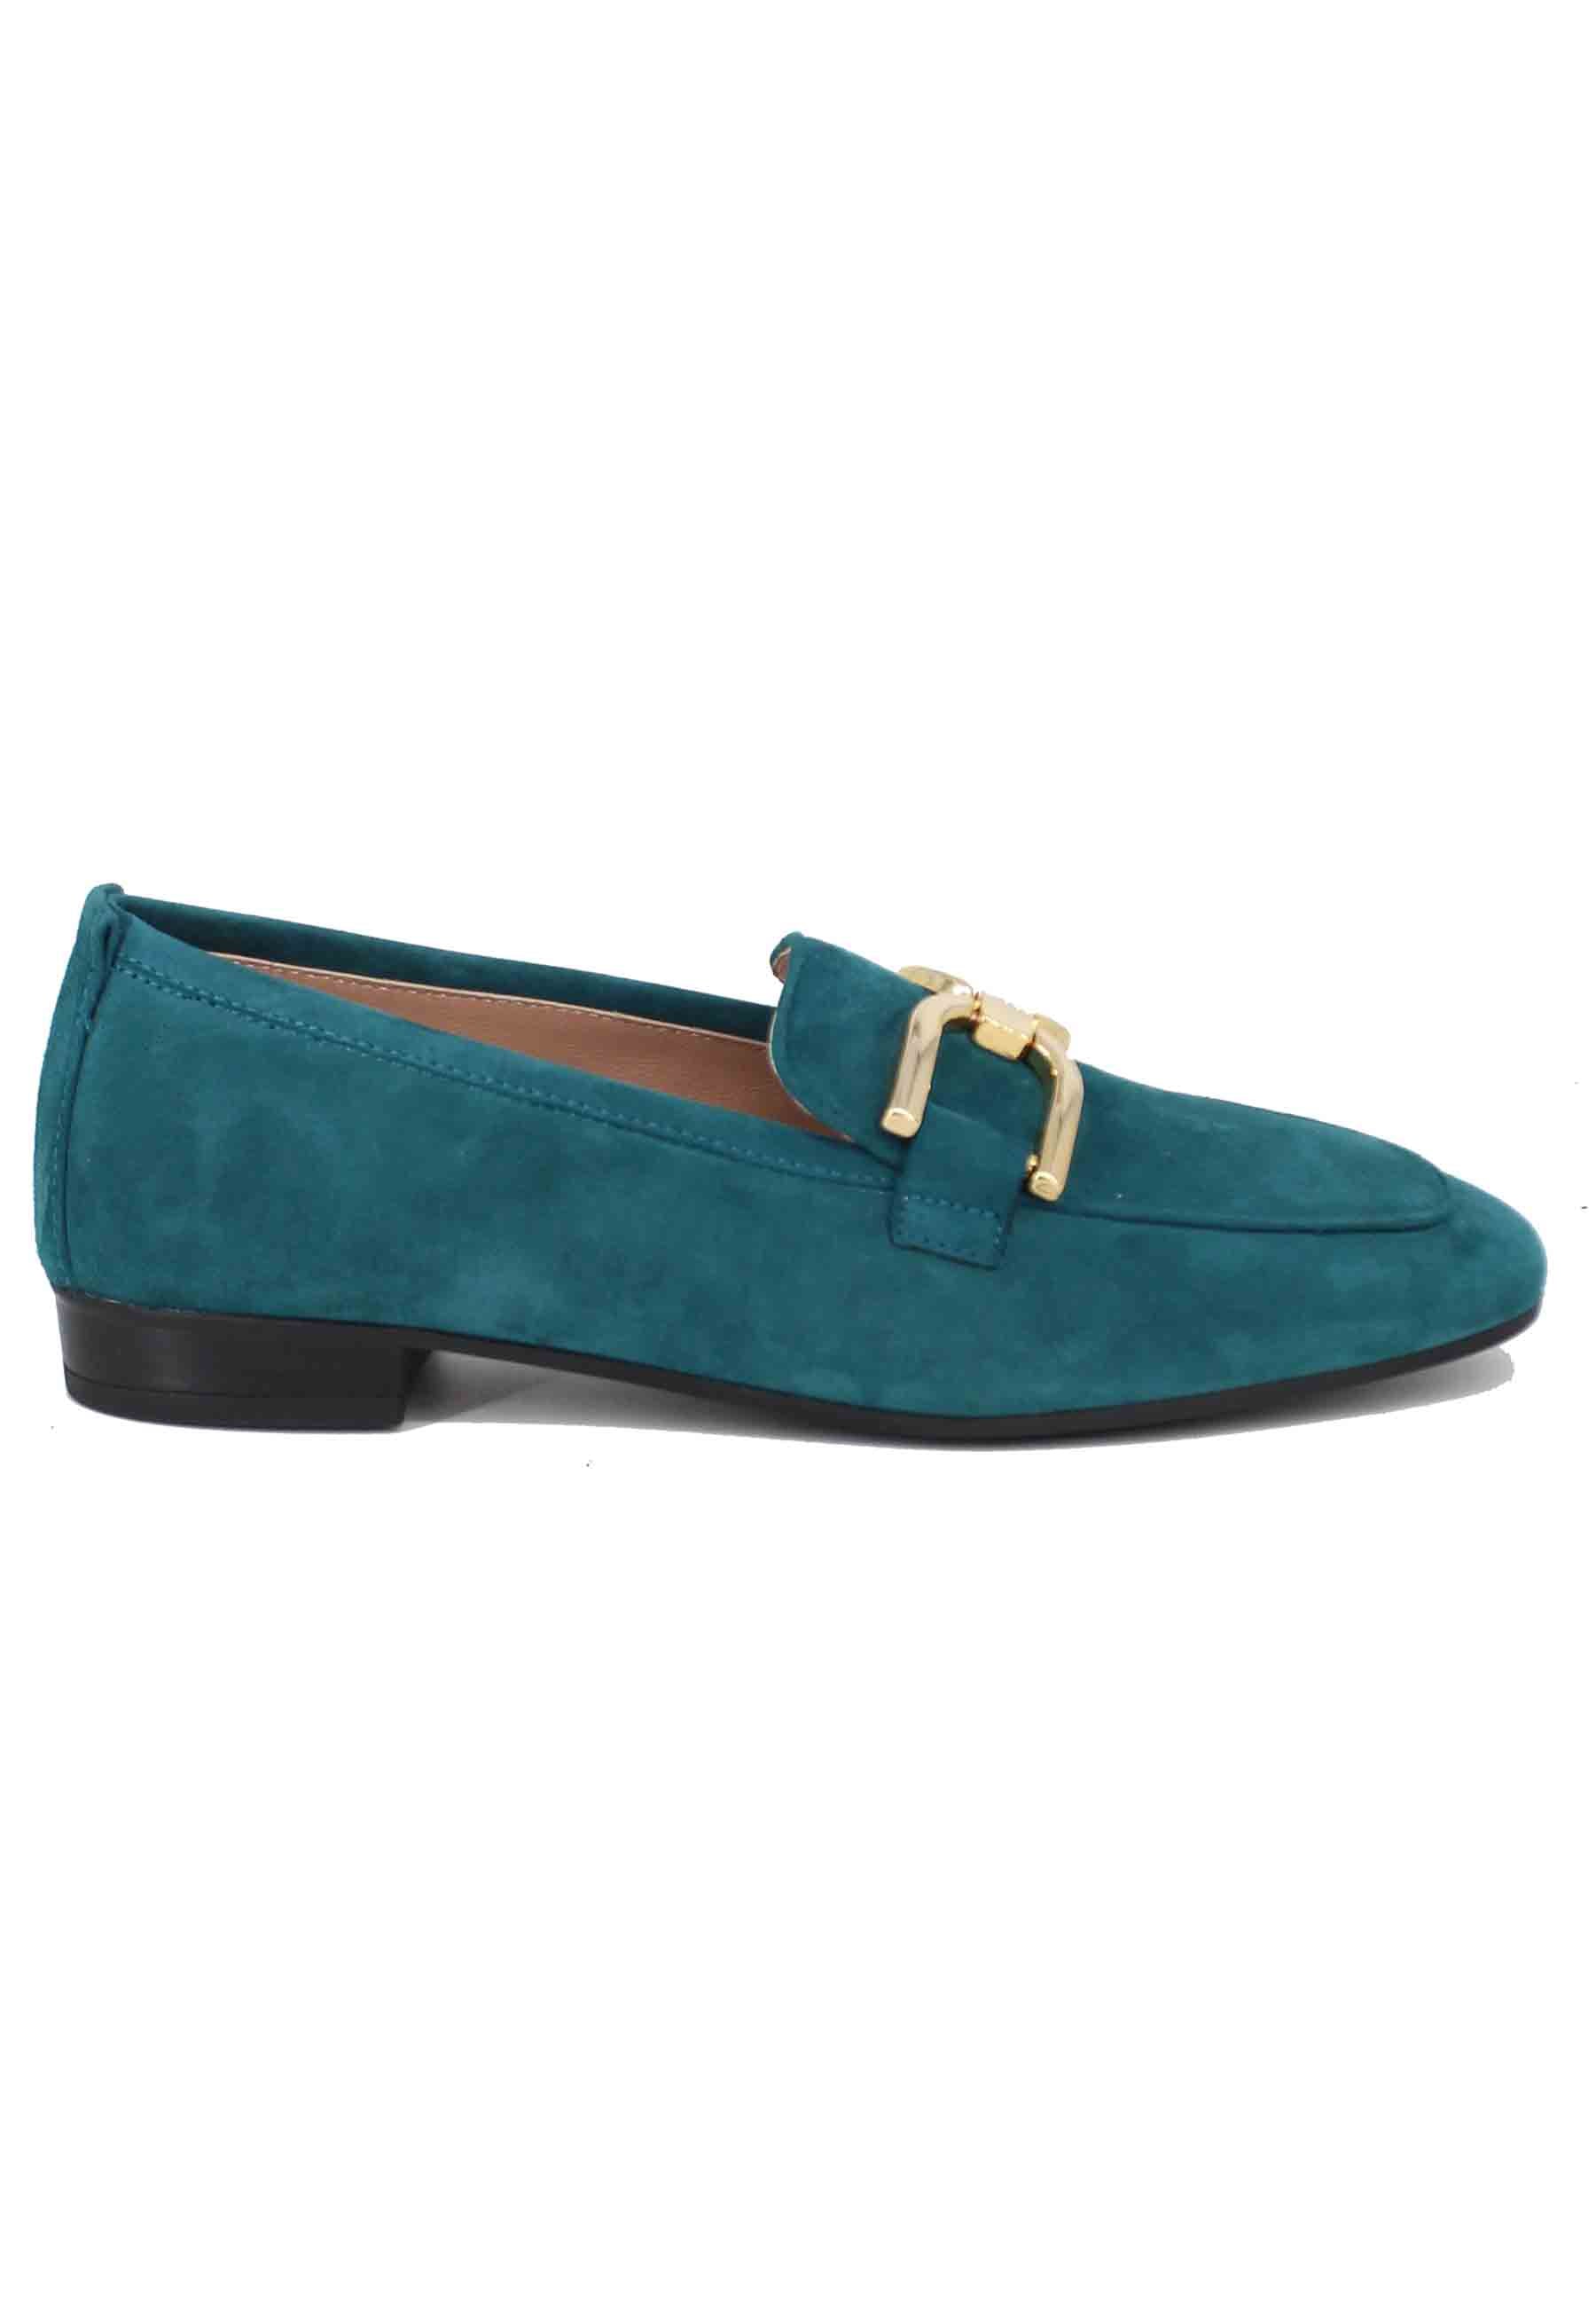 Women's moccasins in petrol suede with gold horsebit